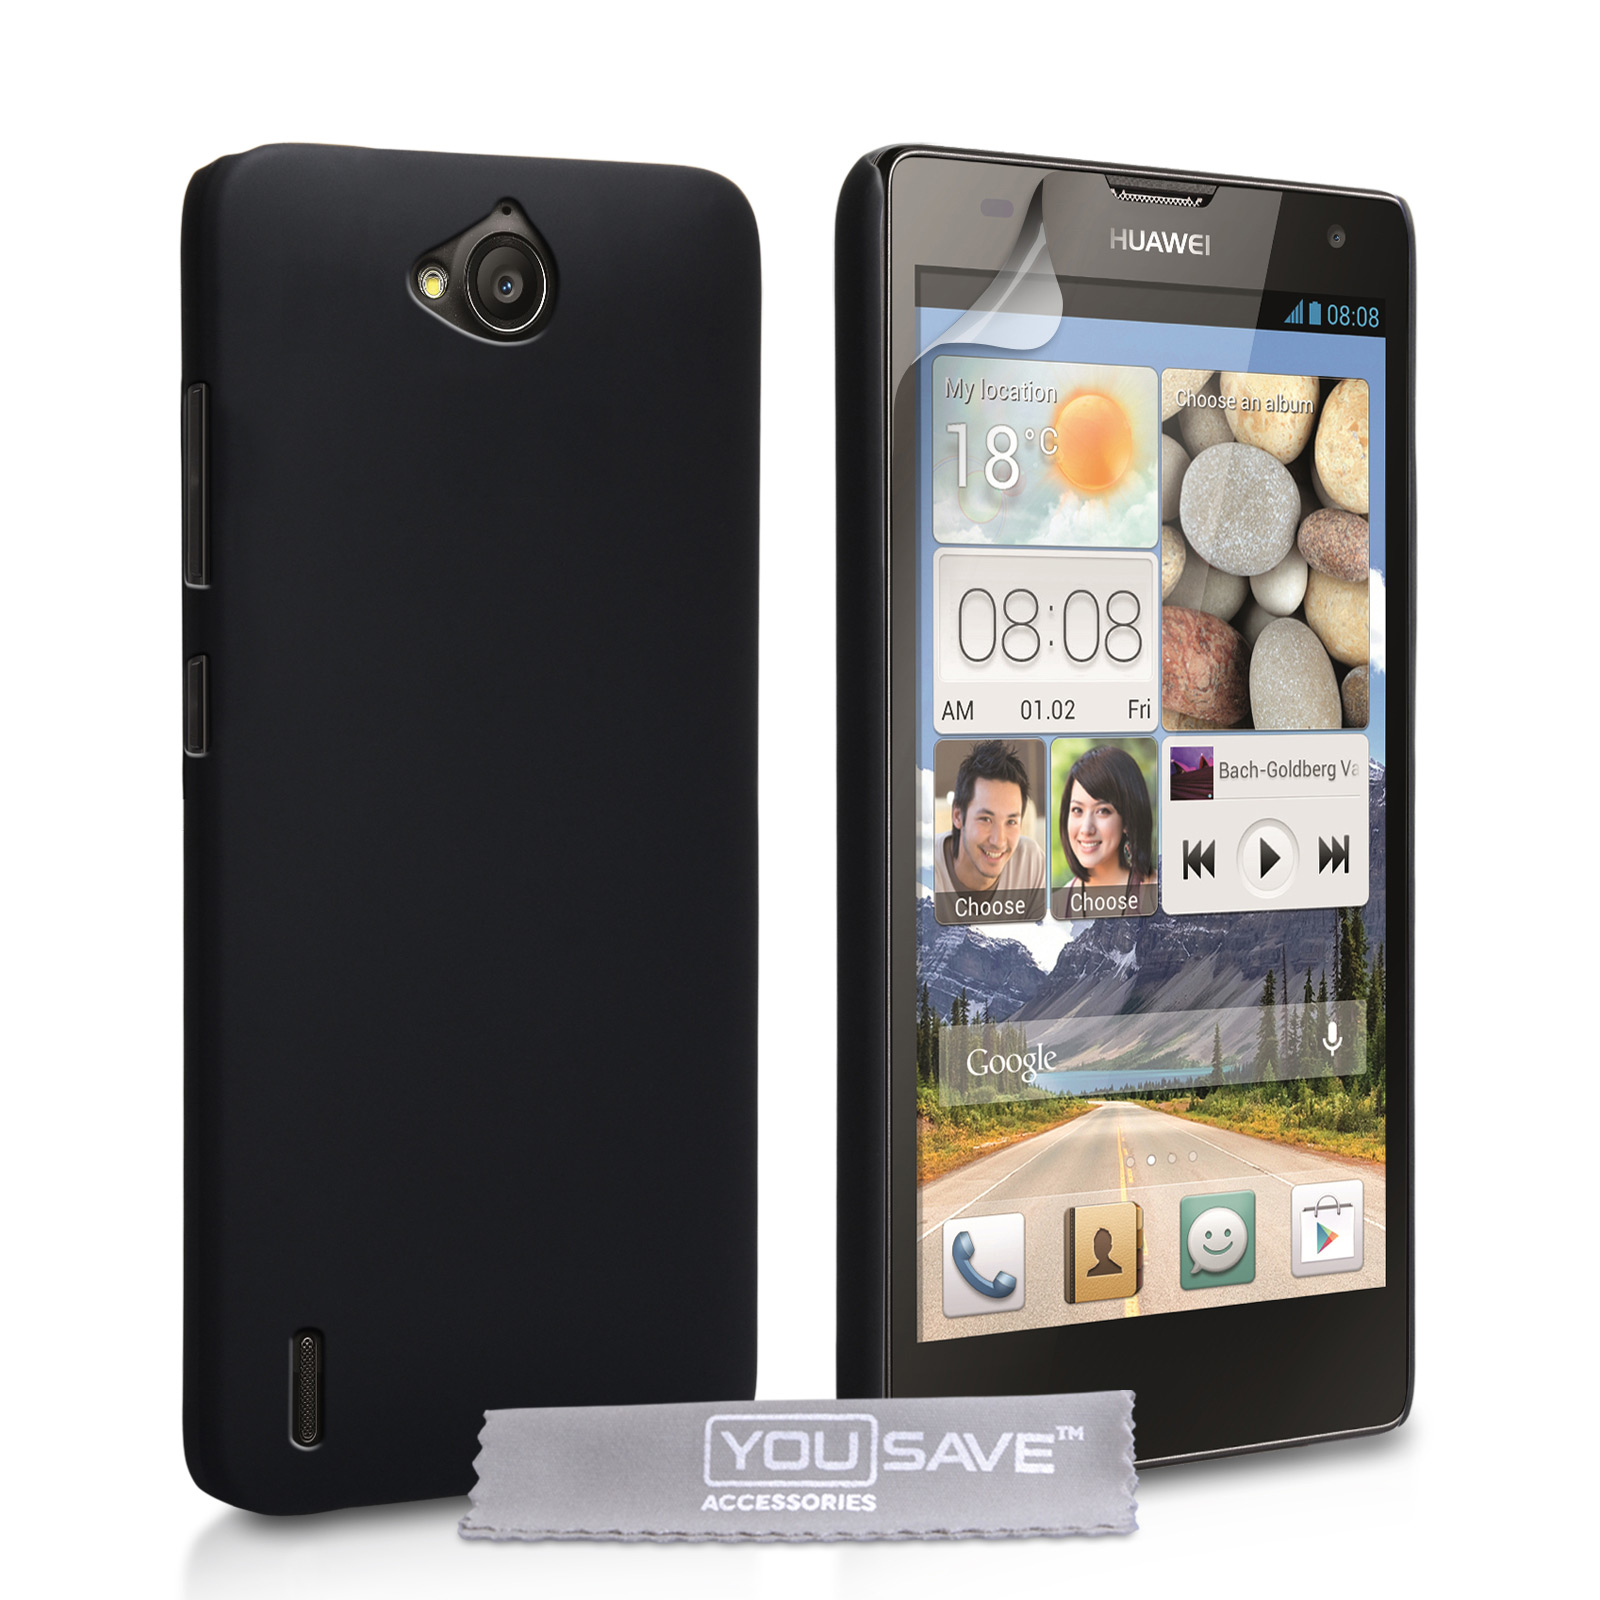 YouSave Accessories Huawei Ascend G740 Hard Hybrid Case - Black